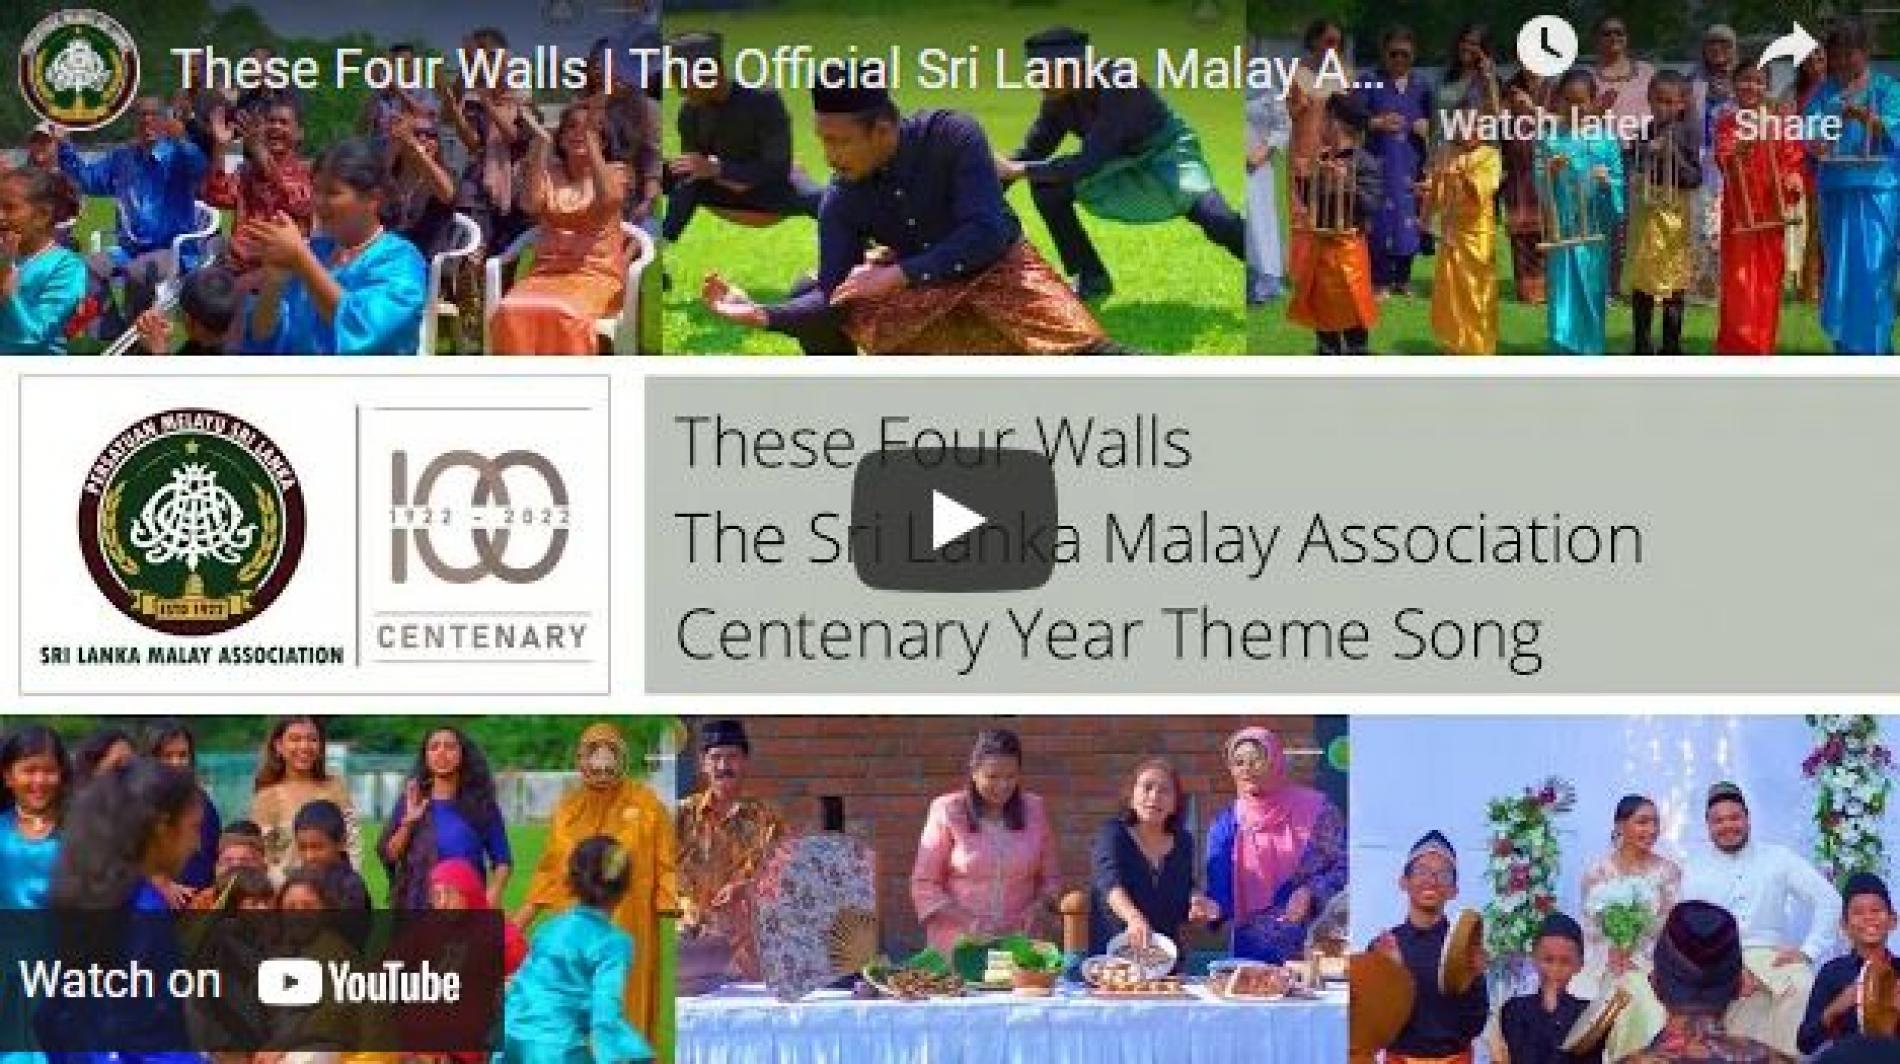 New Music : These Four Walls | The Official Sri Lanka Malay Association Centenary Year Theme Song